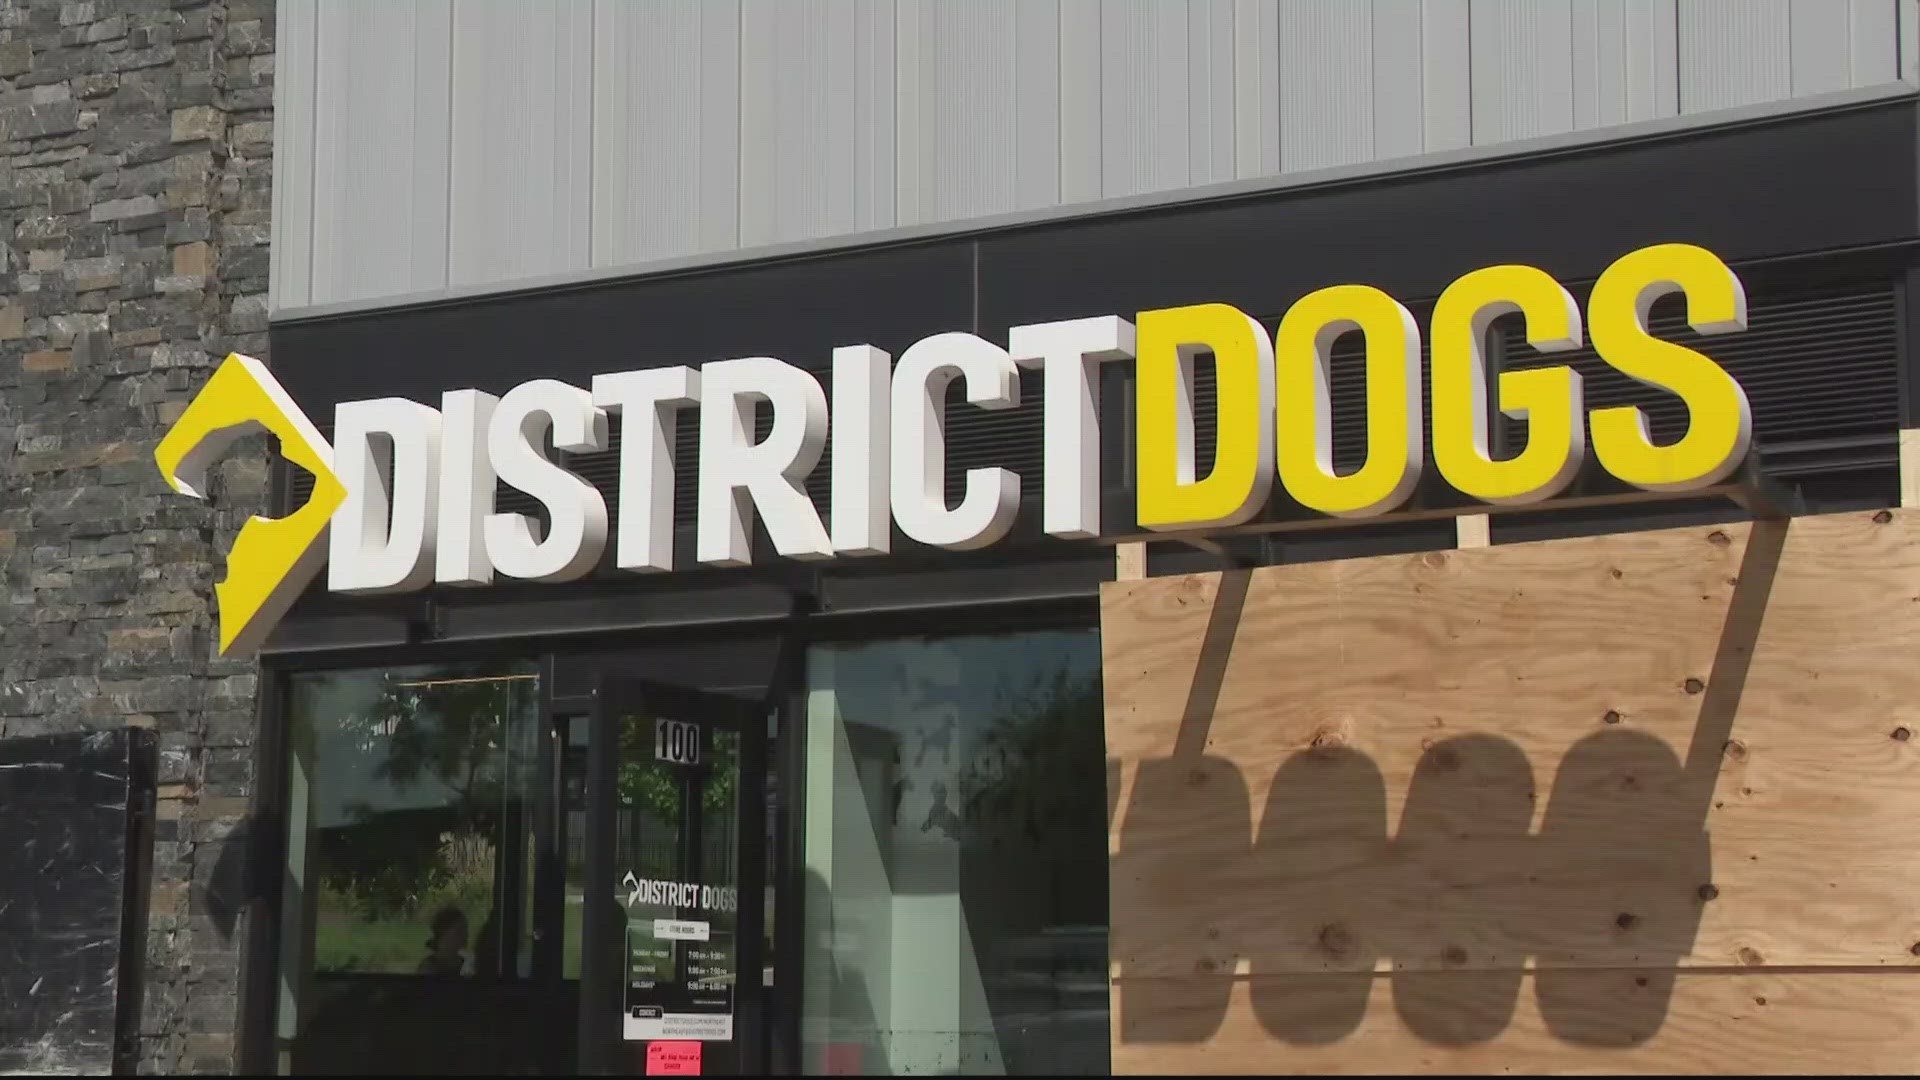 Pet owners who lost their dogs are questioning what protocol was in place at District Dogs ahead of the flood.